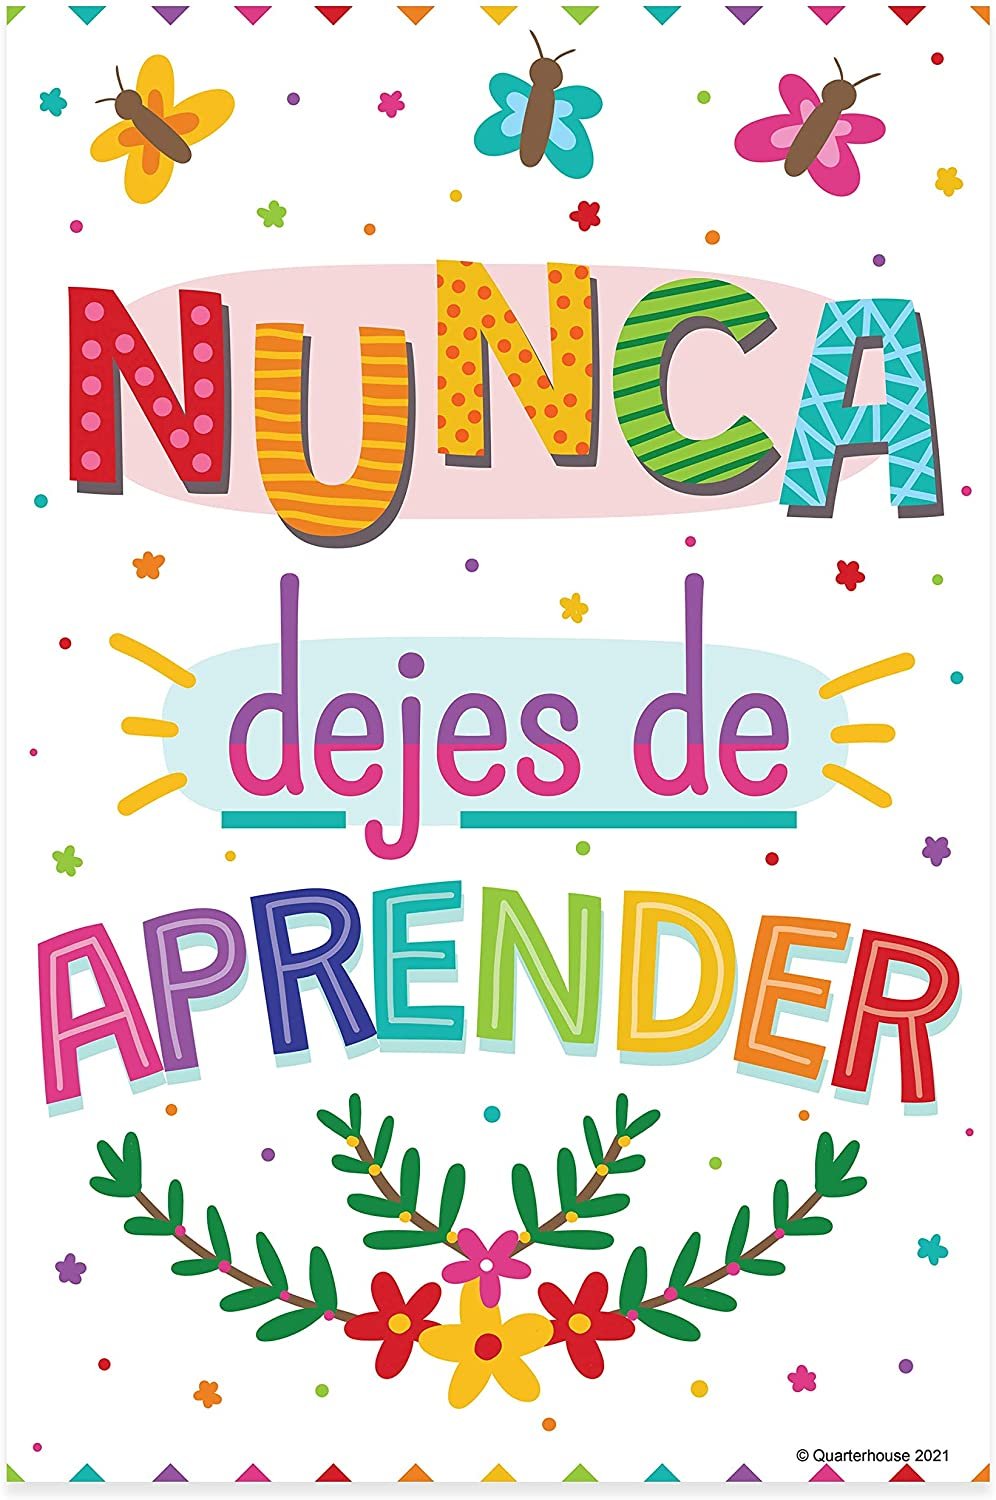 Quarterhouse Spanish Motivational (White) Poster Set, Spanish Classroom Learning Materials for K-12 Students and Teachers, Set of 12, 12 x 18 Inches, Extra Durable